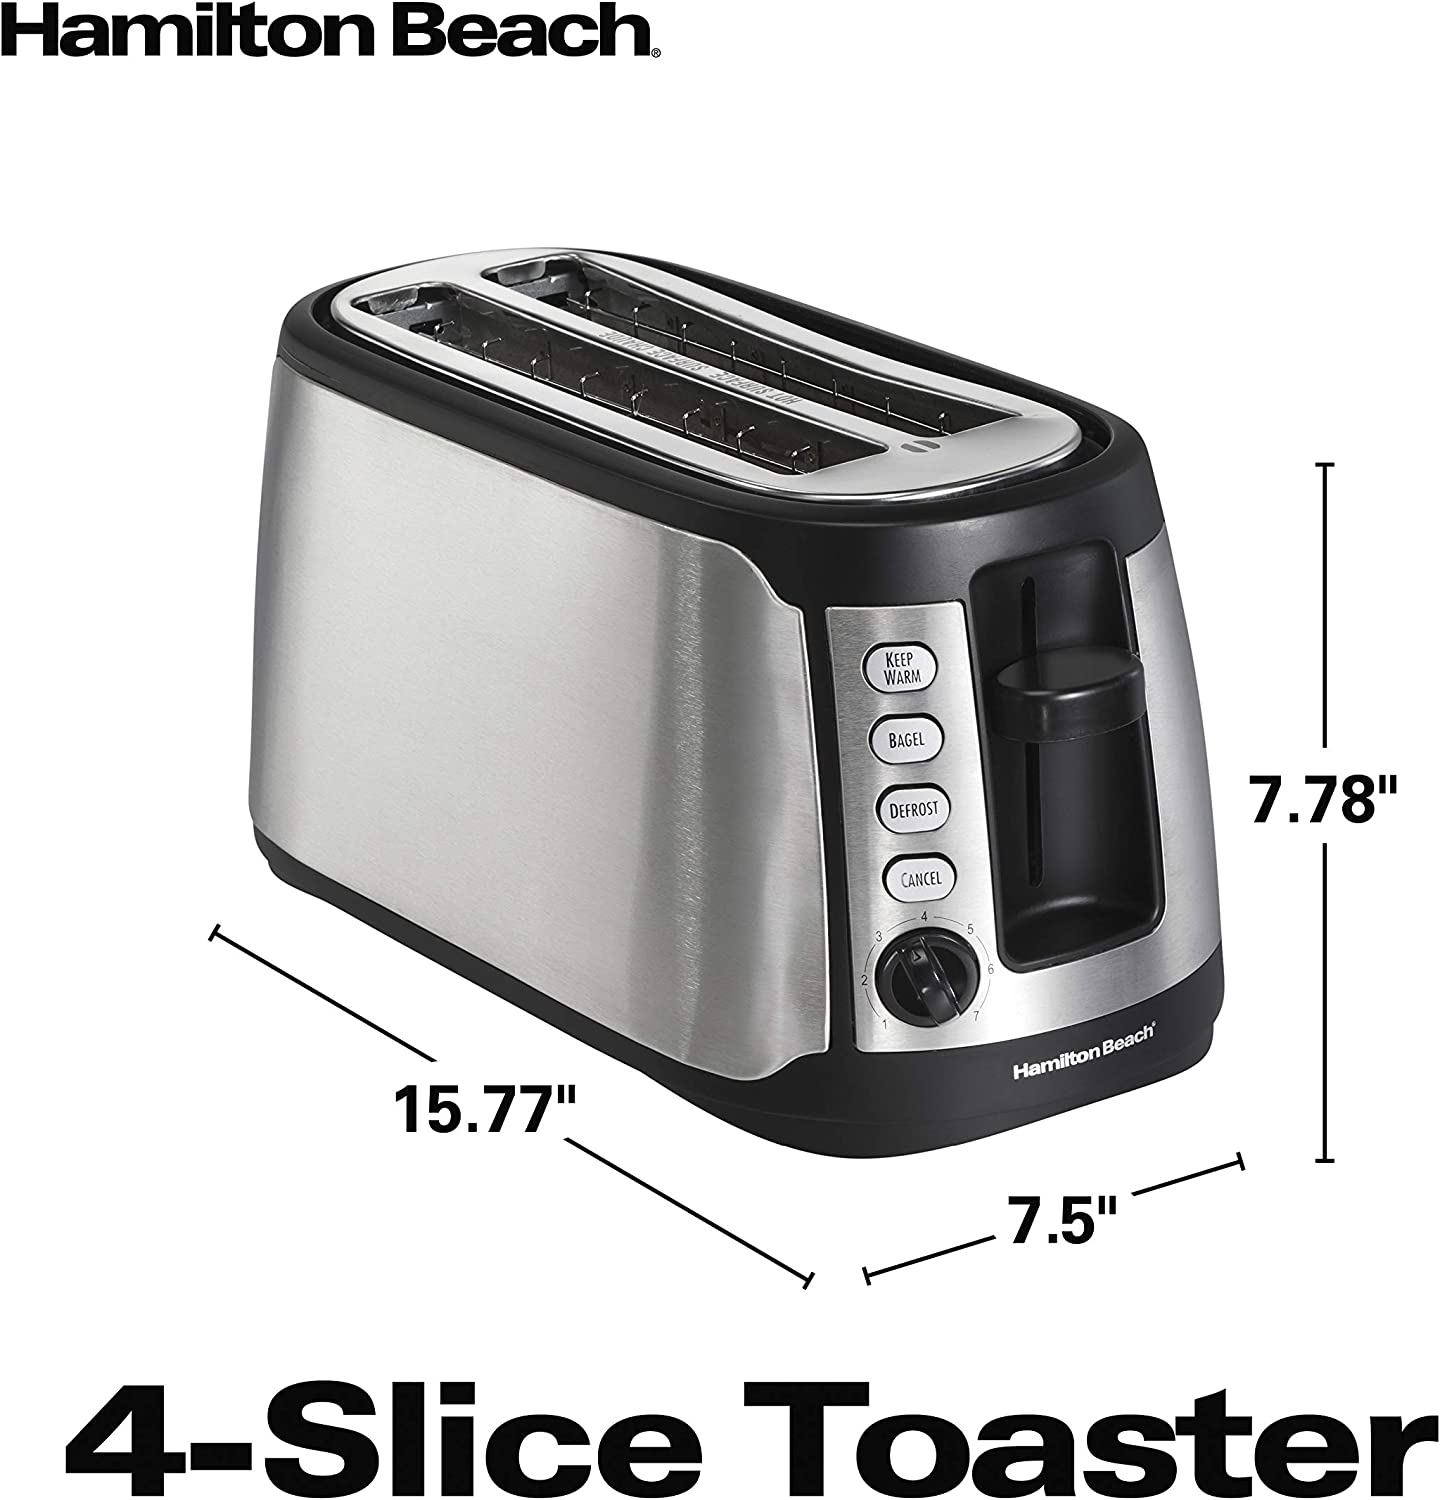 Hamilton Beach 24810C 4-Slice Long Slot Toaster with Keep Warm Stainless Steel - Refurbished